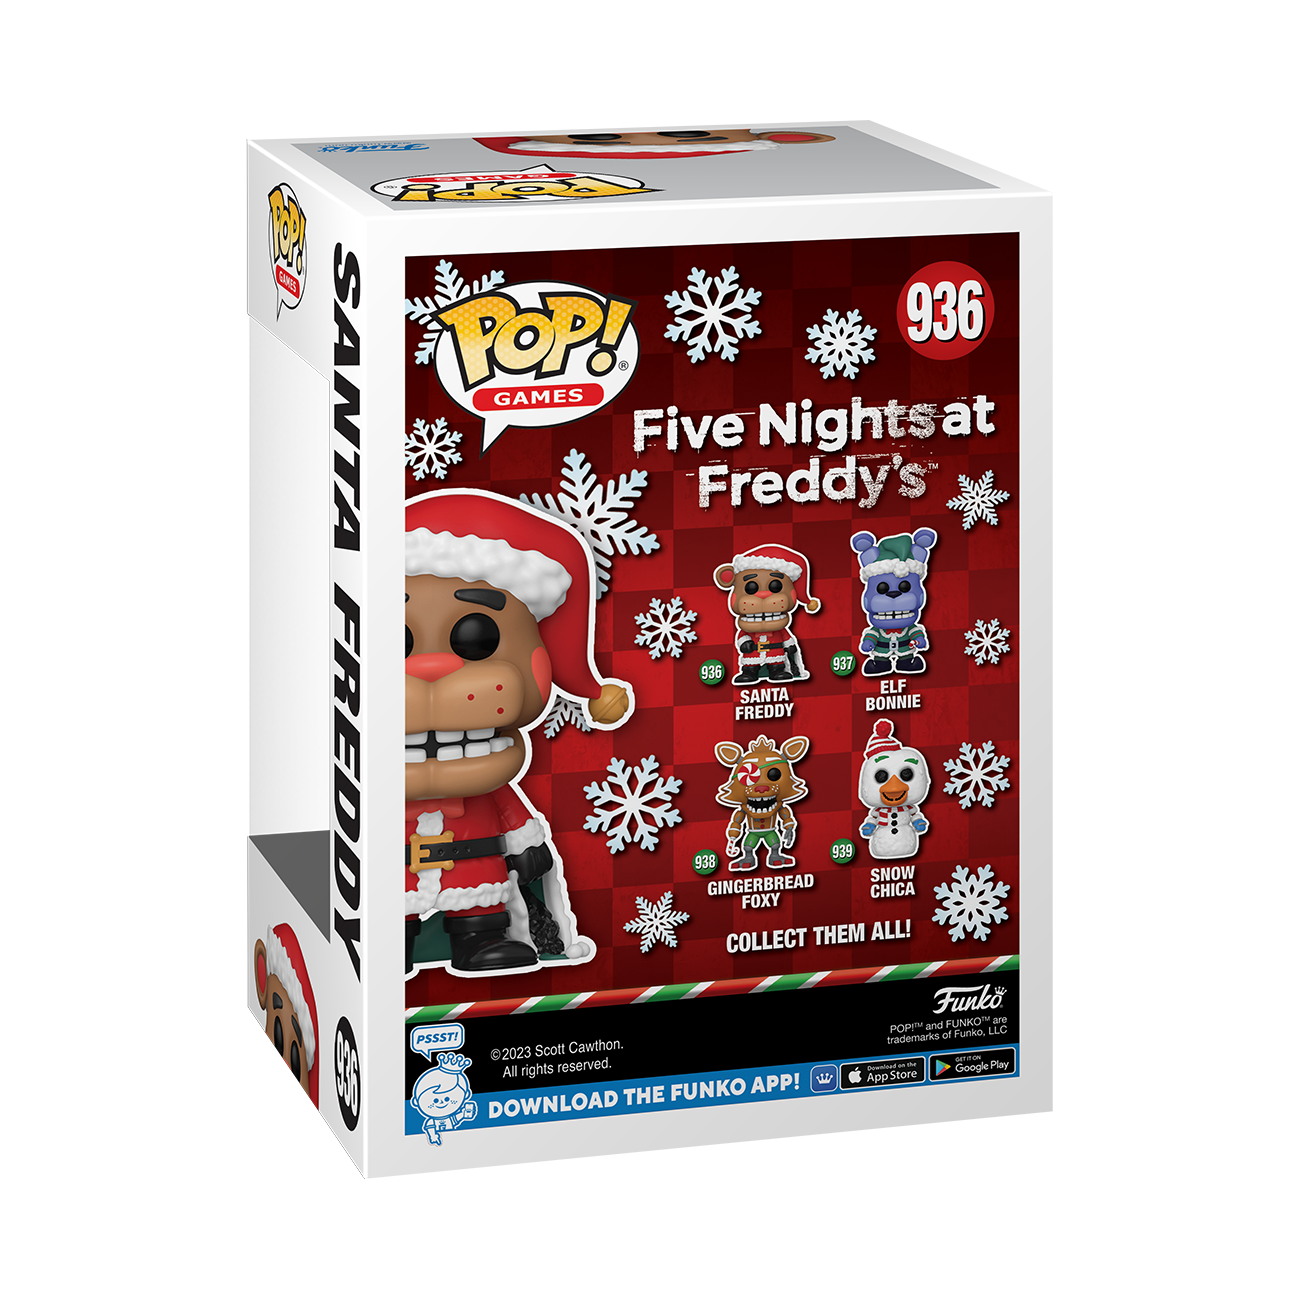  FUNKO GAMES: Five Nights at Freddy's - Night of